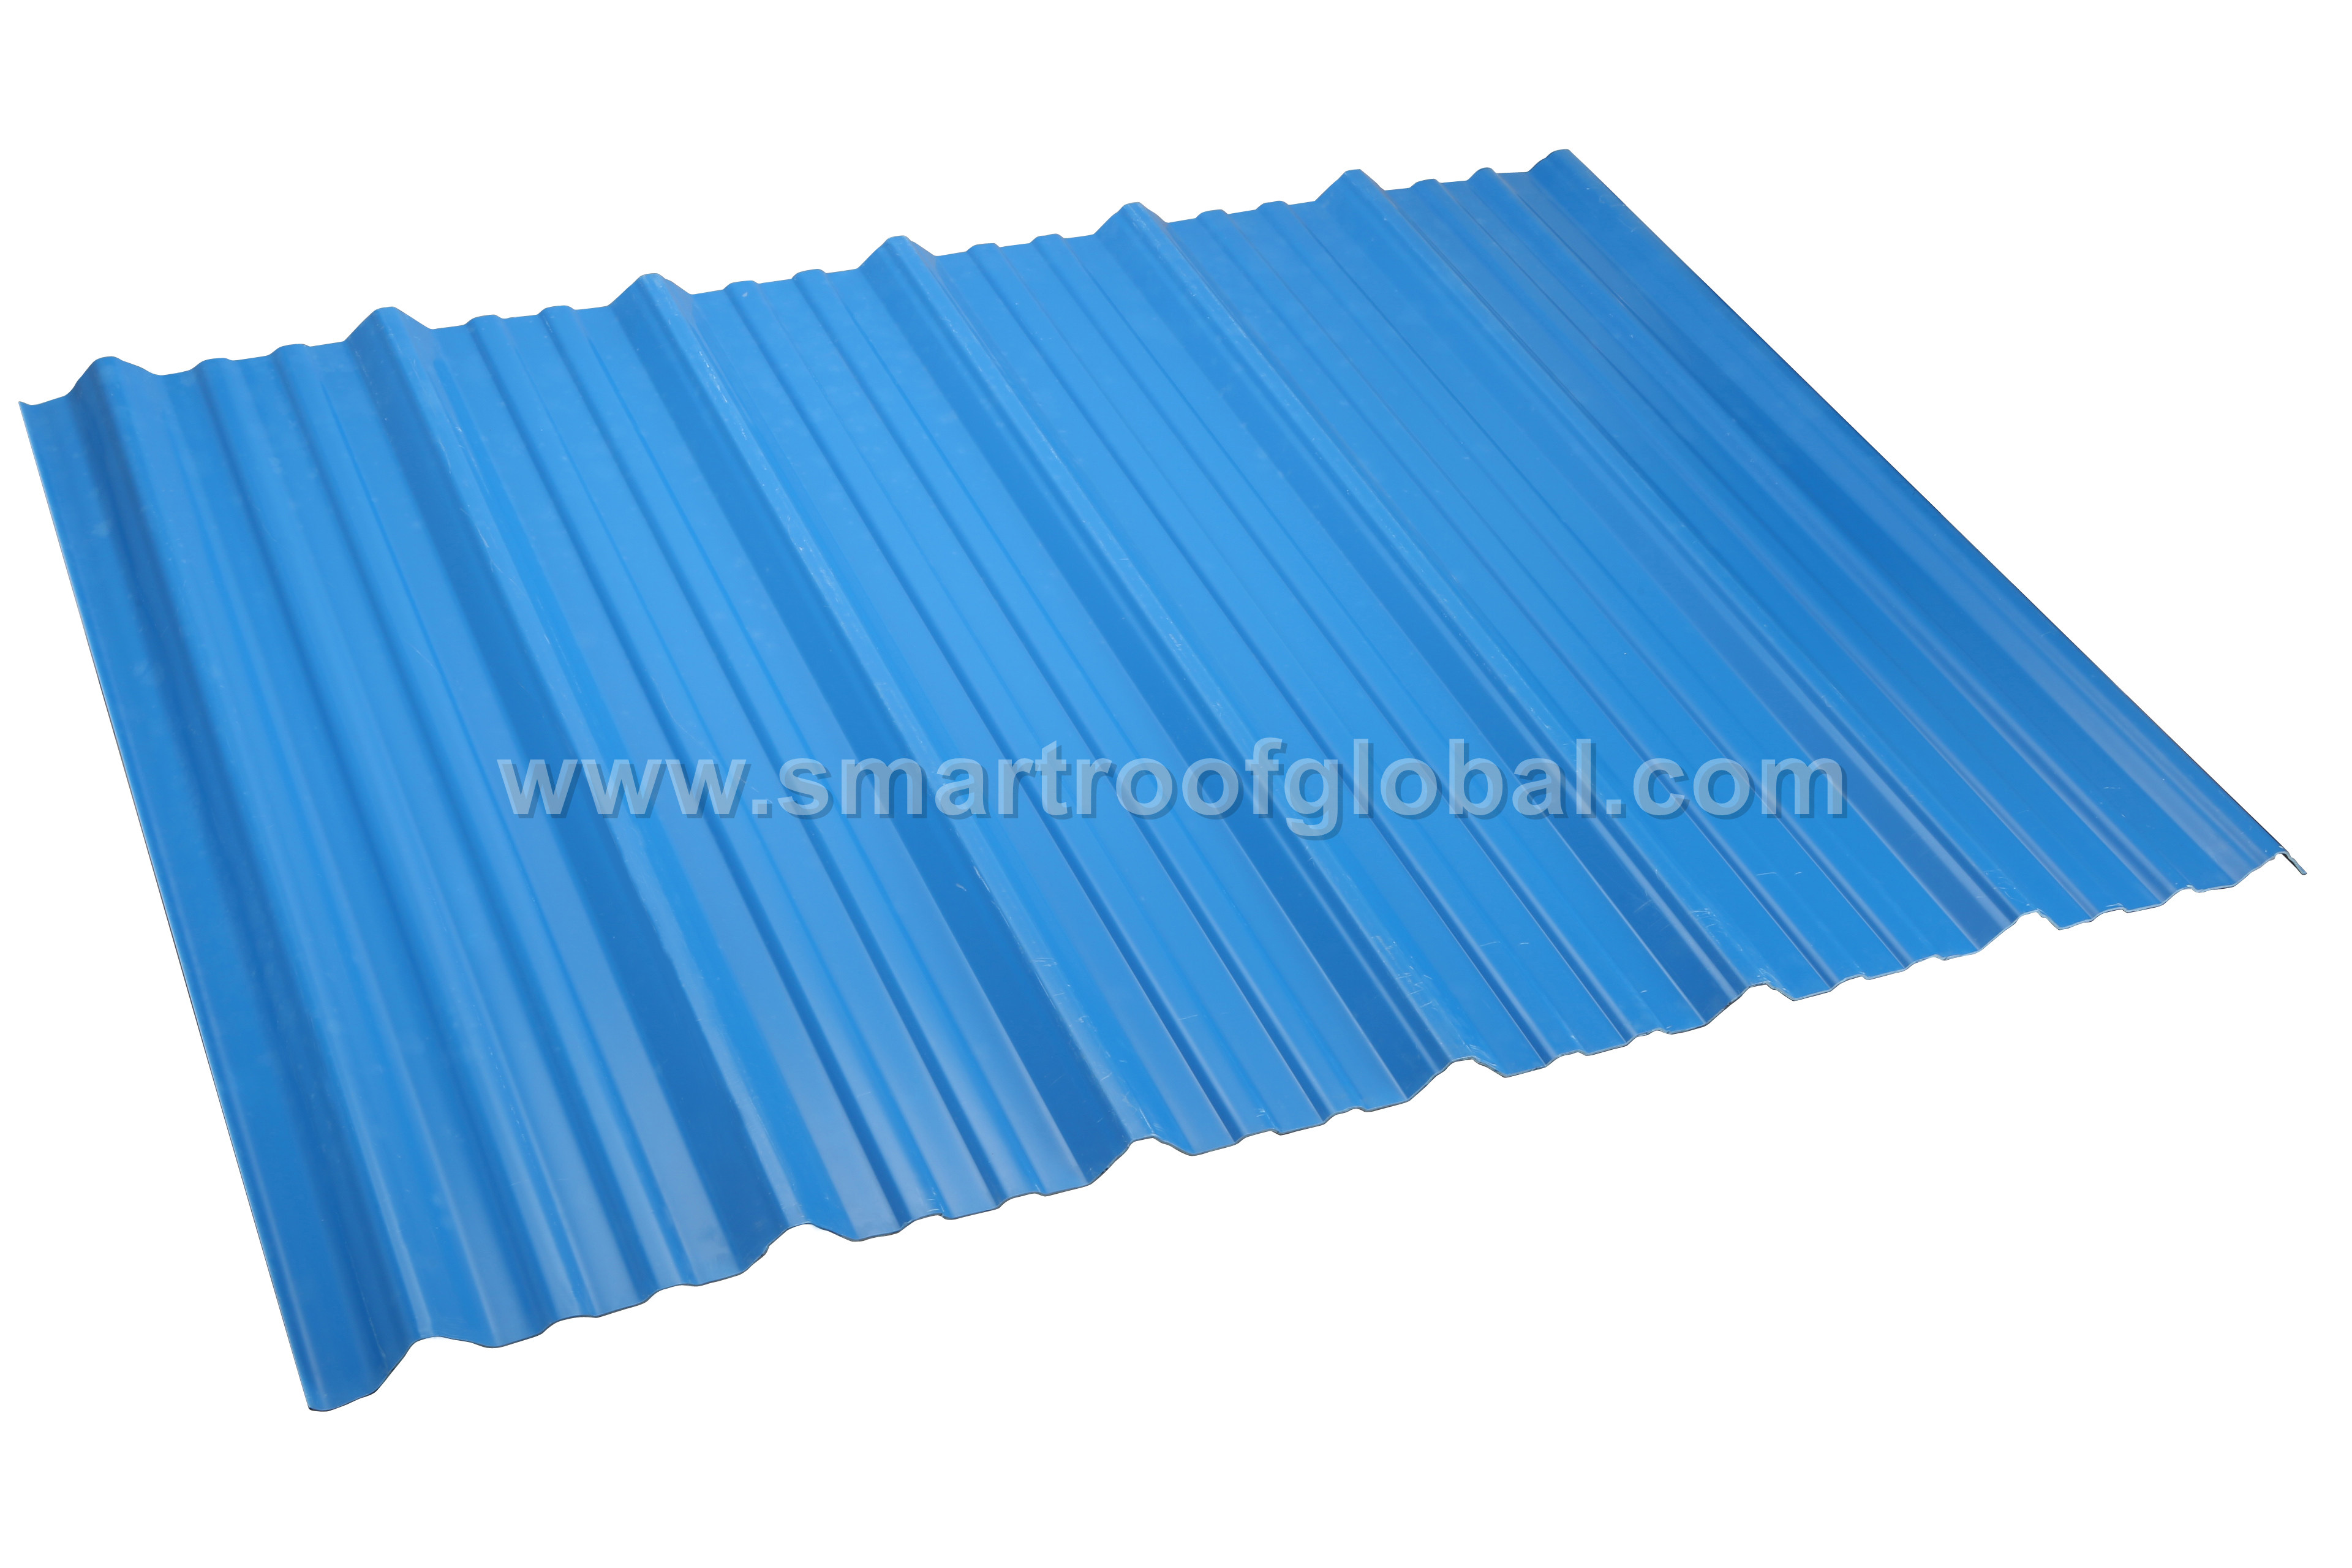 China wholesale Roof Tiles For Sale - Pvc Corrugated Roofing Sheets – Smartroof